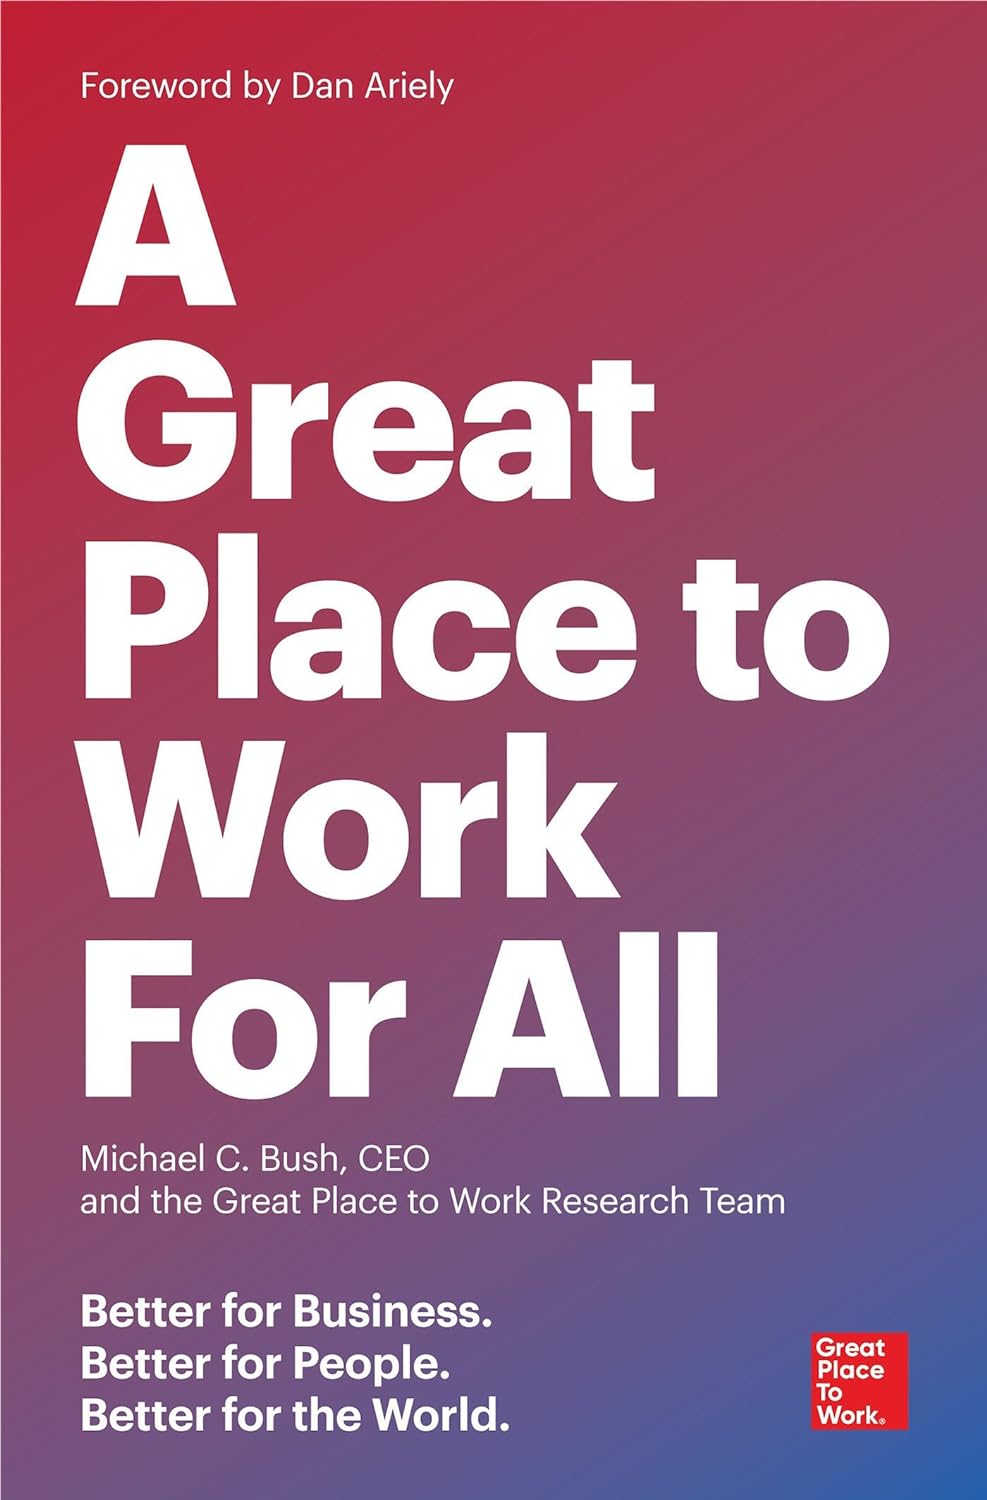 https://www.amazon.com/Great-Place-Work-All-Business/dp/1523095083